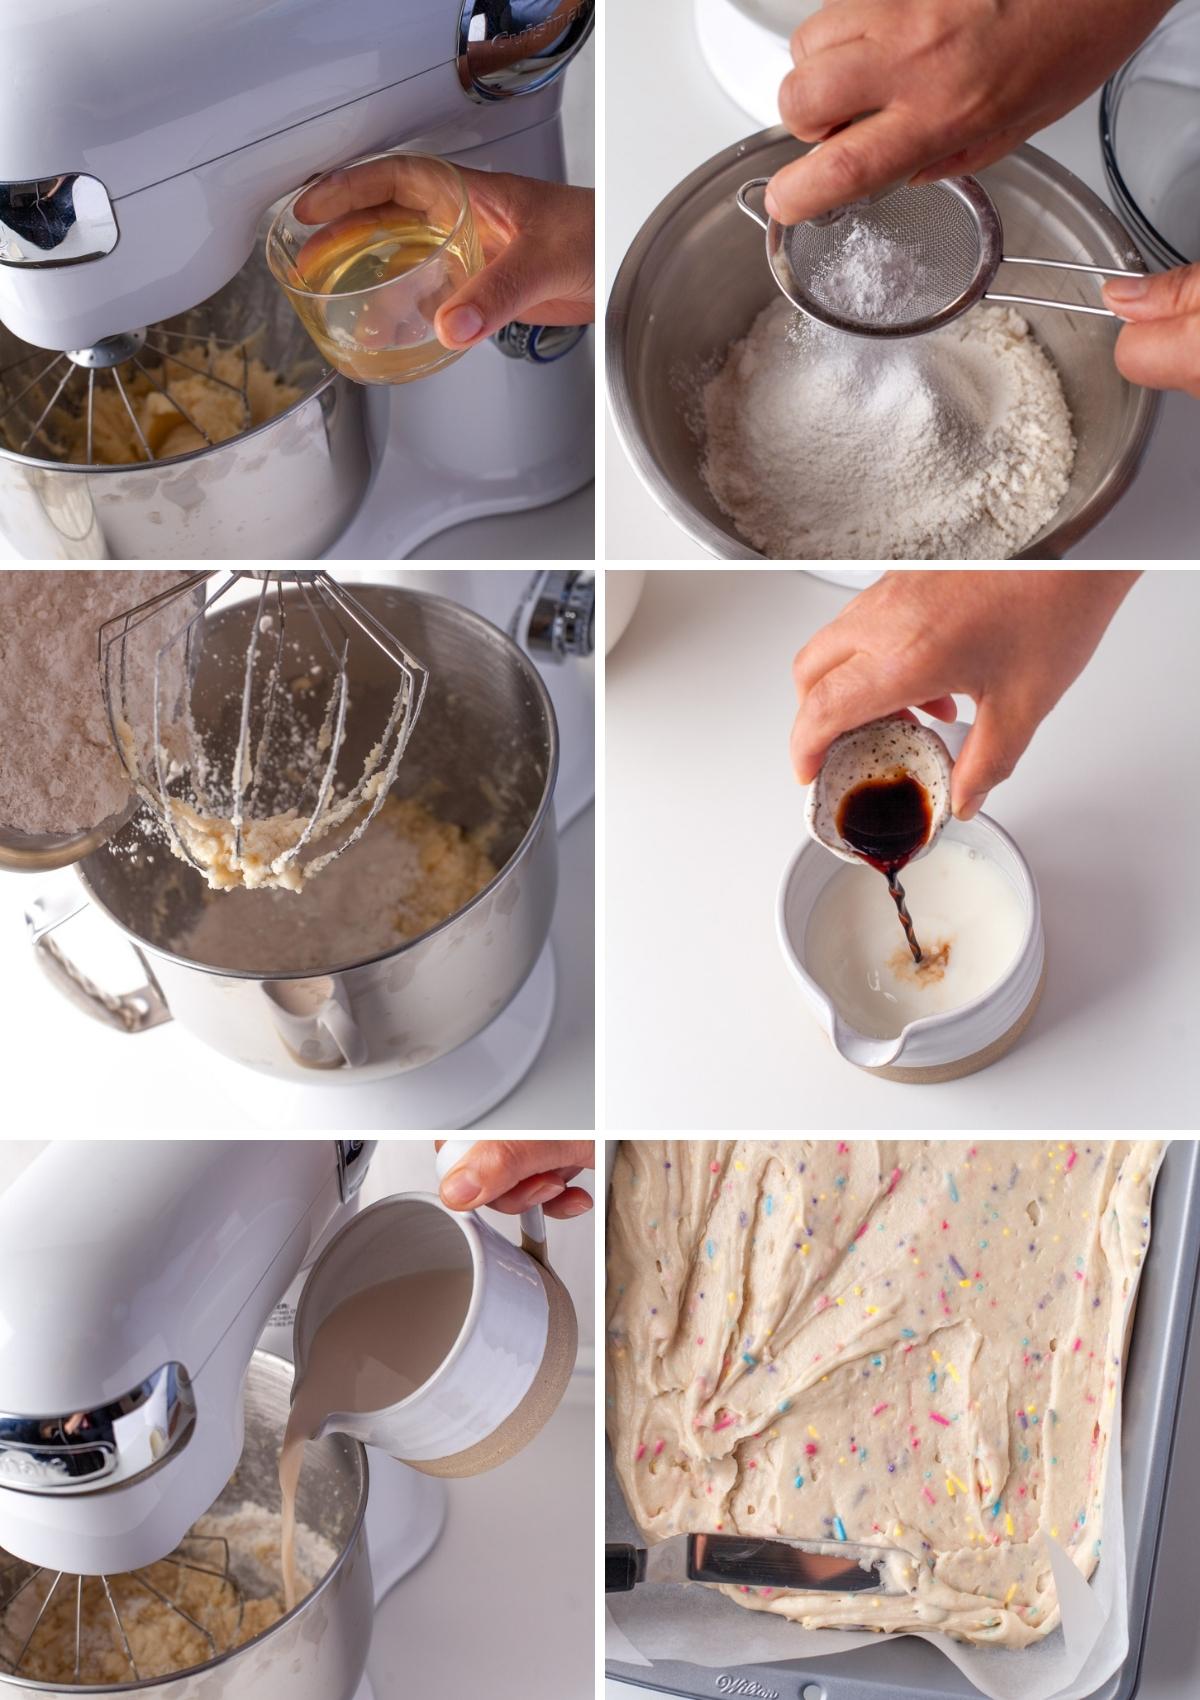 steps for making a funfetti cake batter, including mixing wet ingredients first then dry ingredients together 